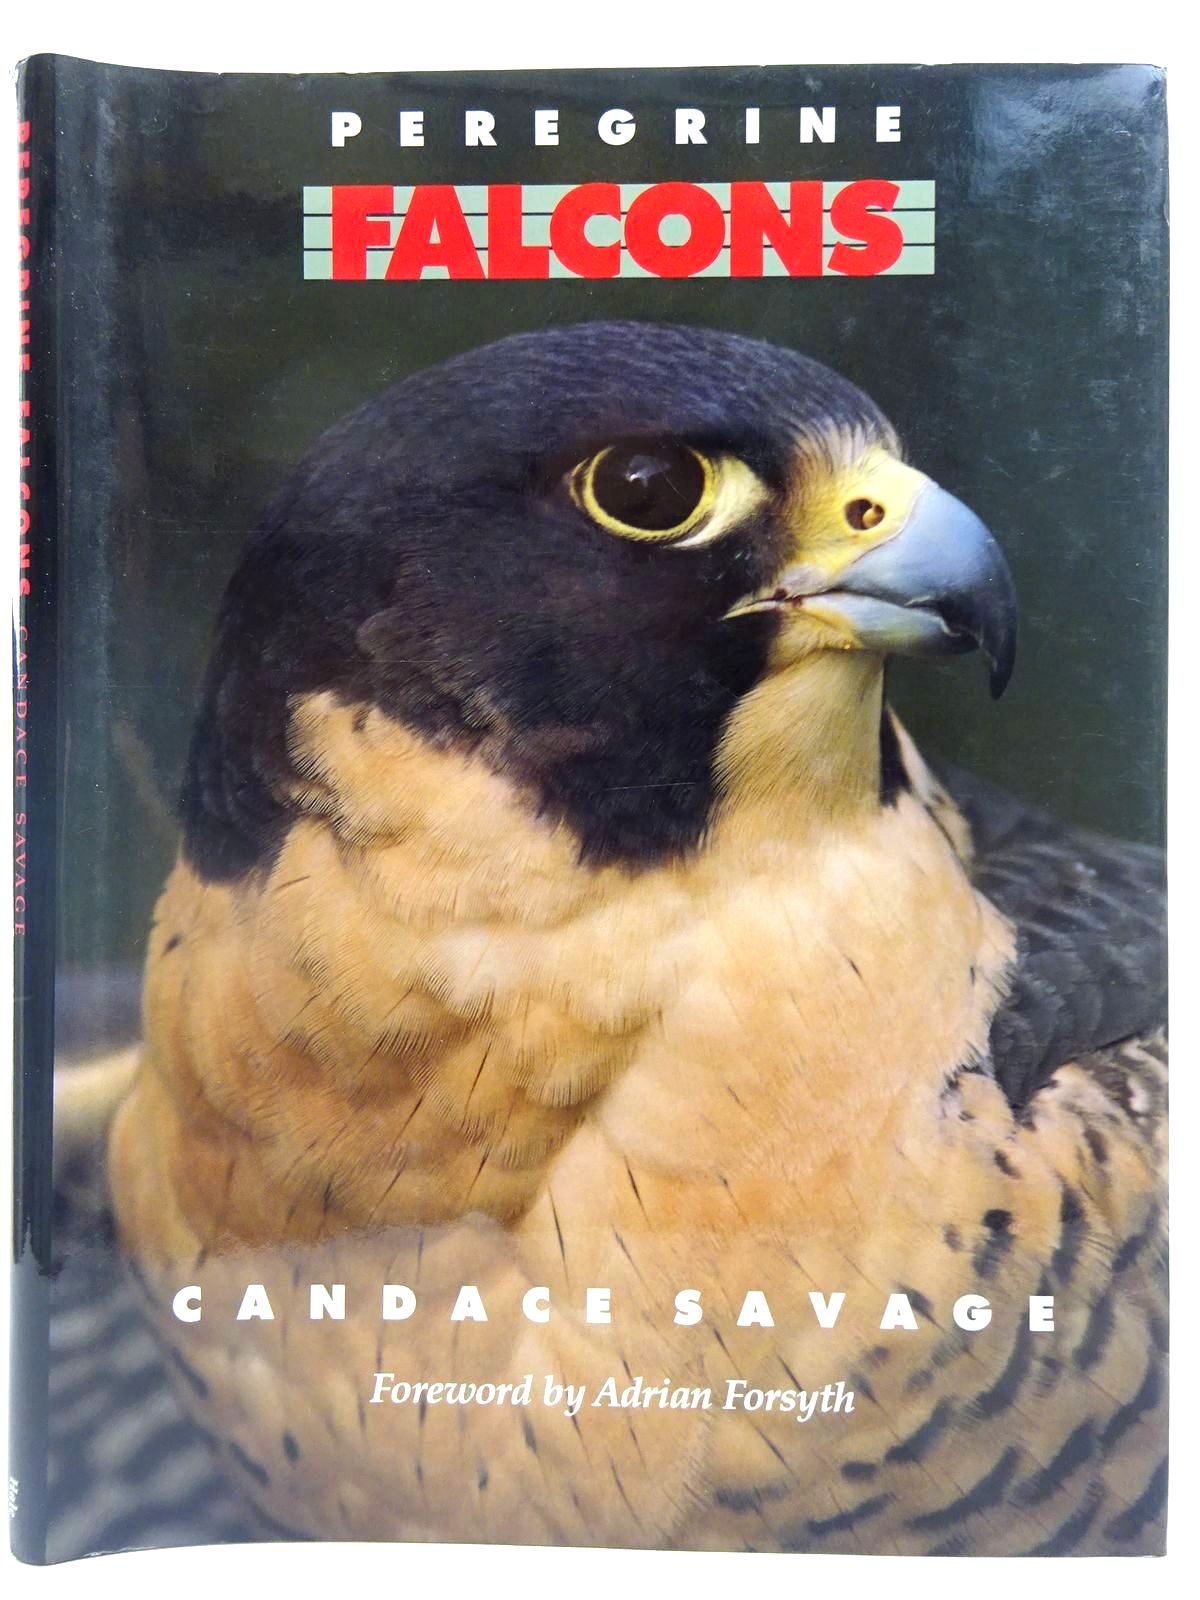 Photo of PEREGRINE FALCONS written by Savage, Candace published by Robert Hale (STOCK CODE: 2127744)  for sale by Stella & Rose's Books